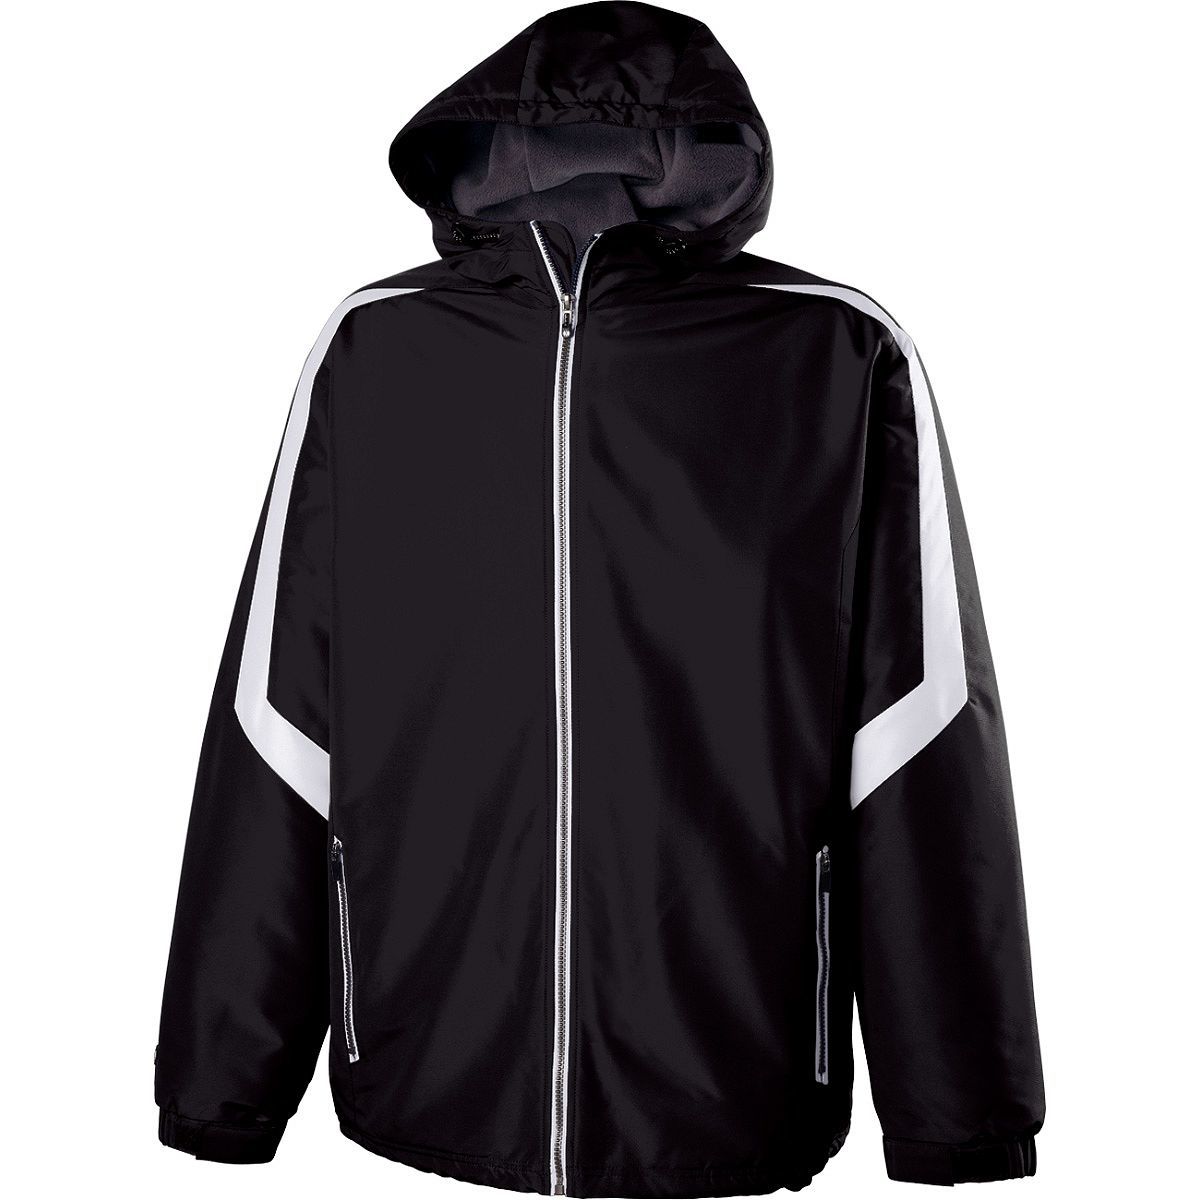 Holloway Sportswear L Charger Jacket Black/White 229059 - image 4 of 4